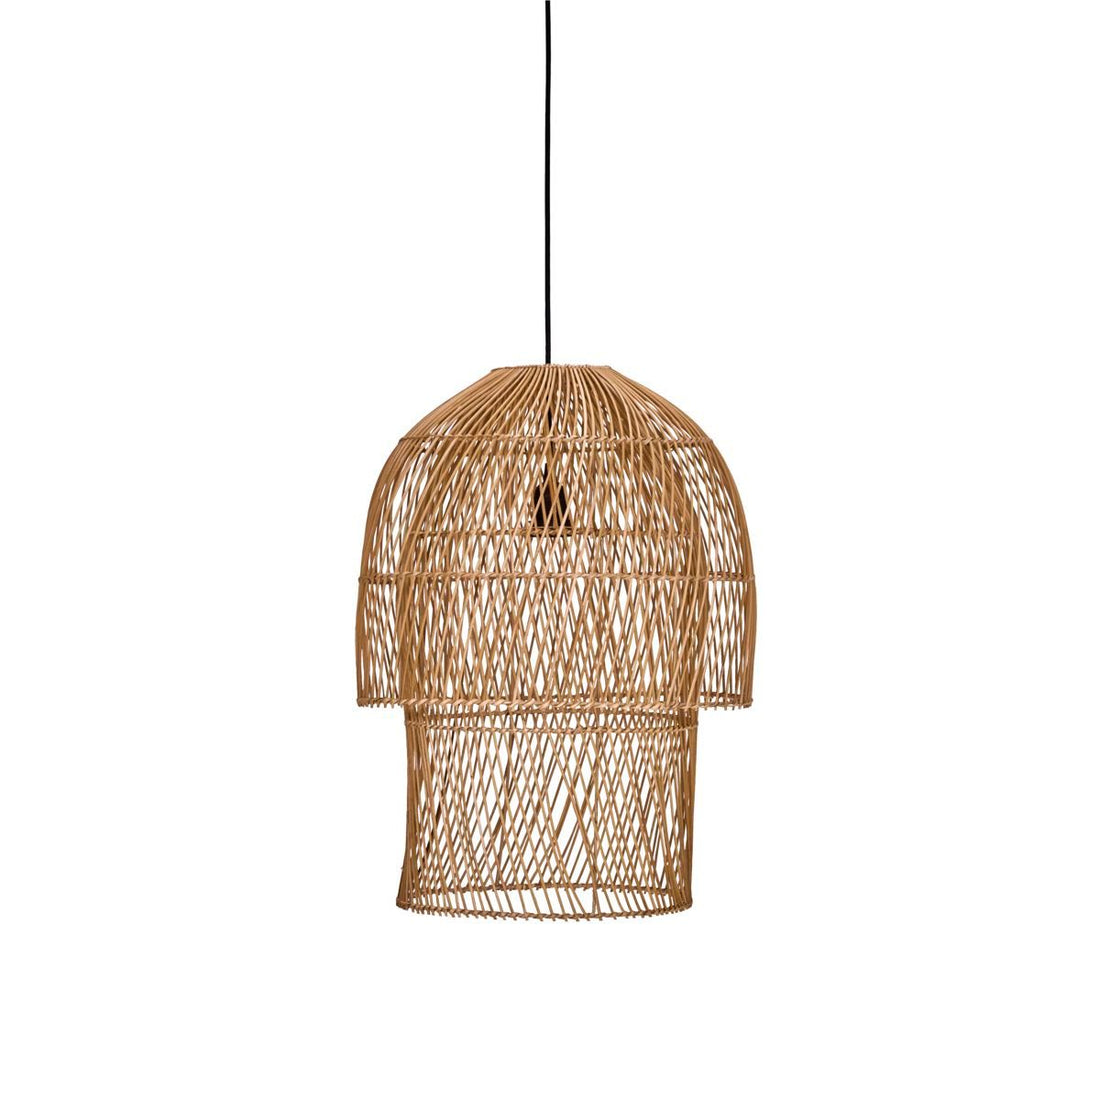 Doctor House Lampshade, Hdgetti, Natural